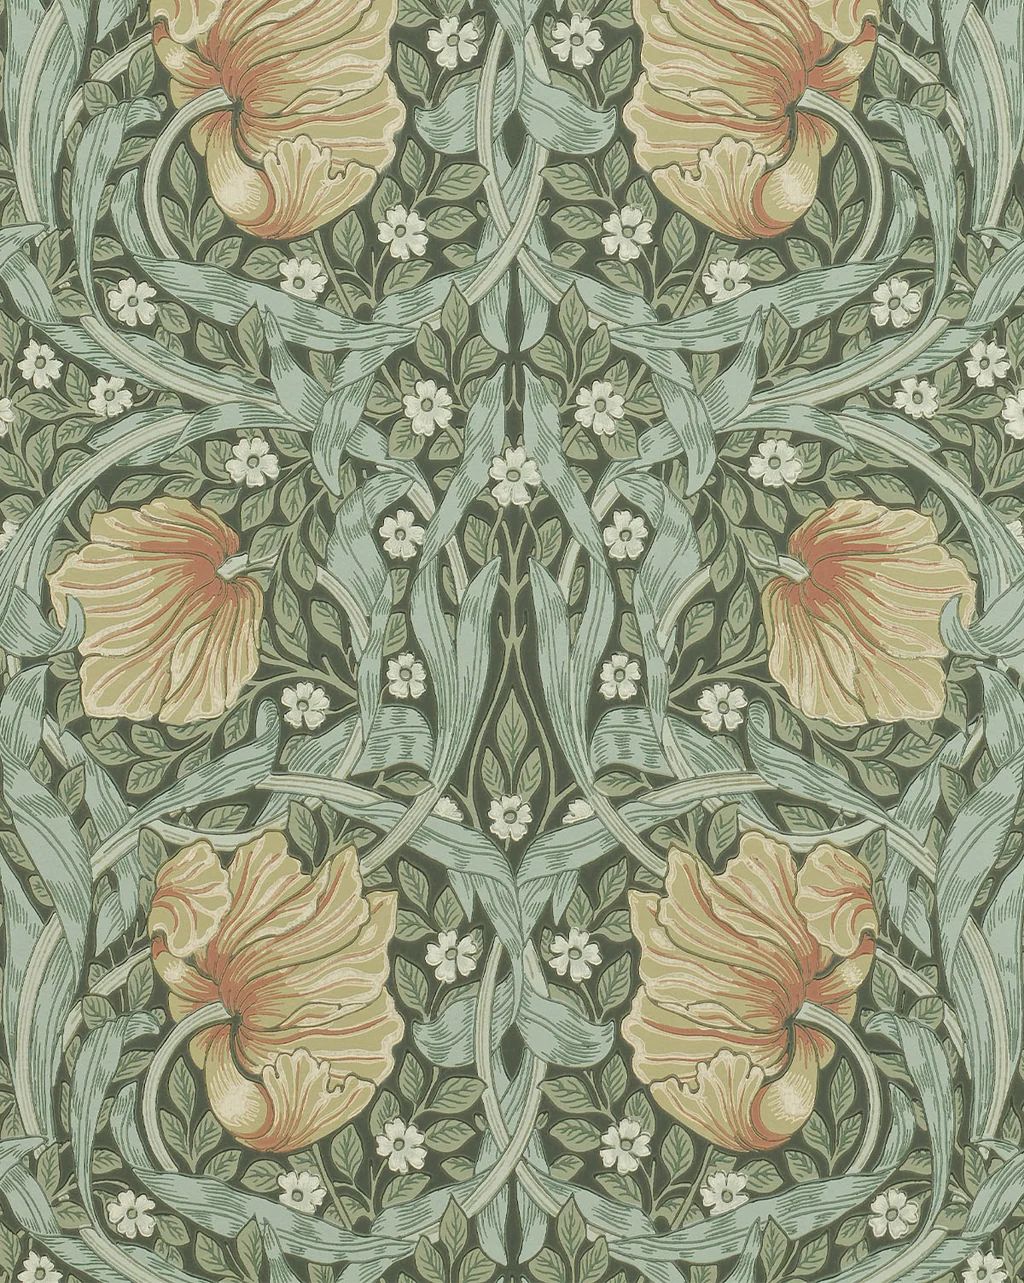 Pimpernel Wallpaper By Morris & Co. | McGee & Co.